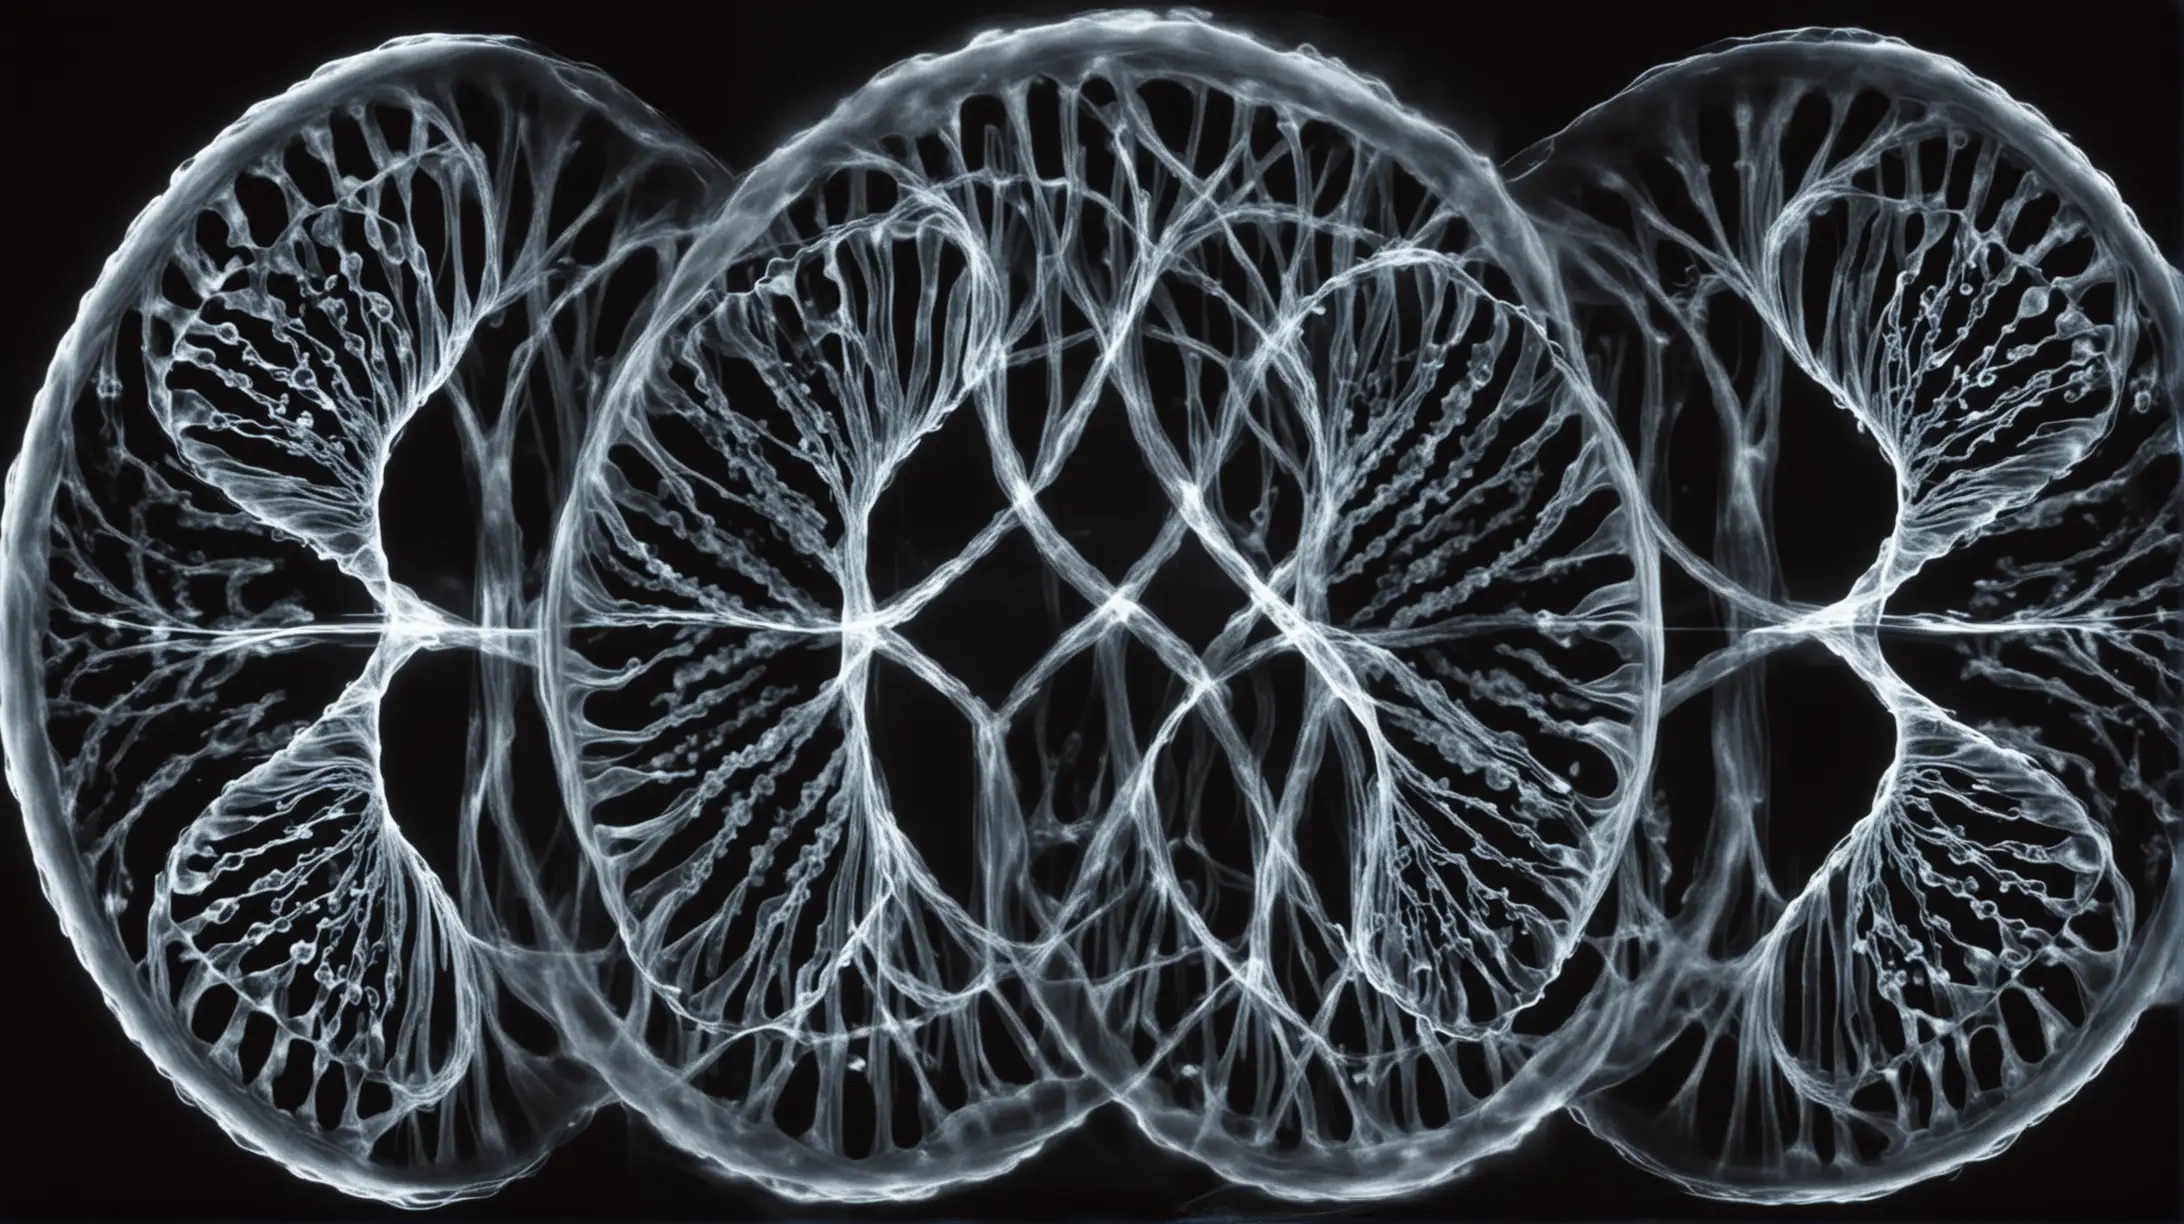 DNA Strand Cymatics Visualization Abstract Molecular Patterns in Vibrant Colors